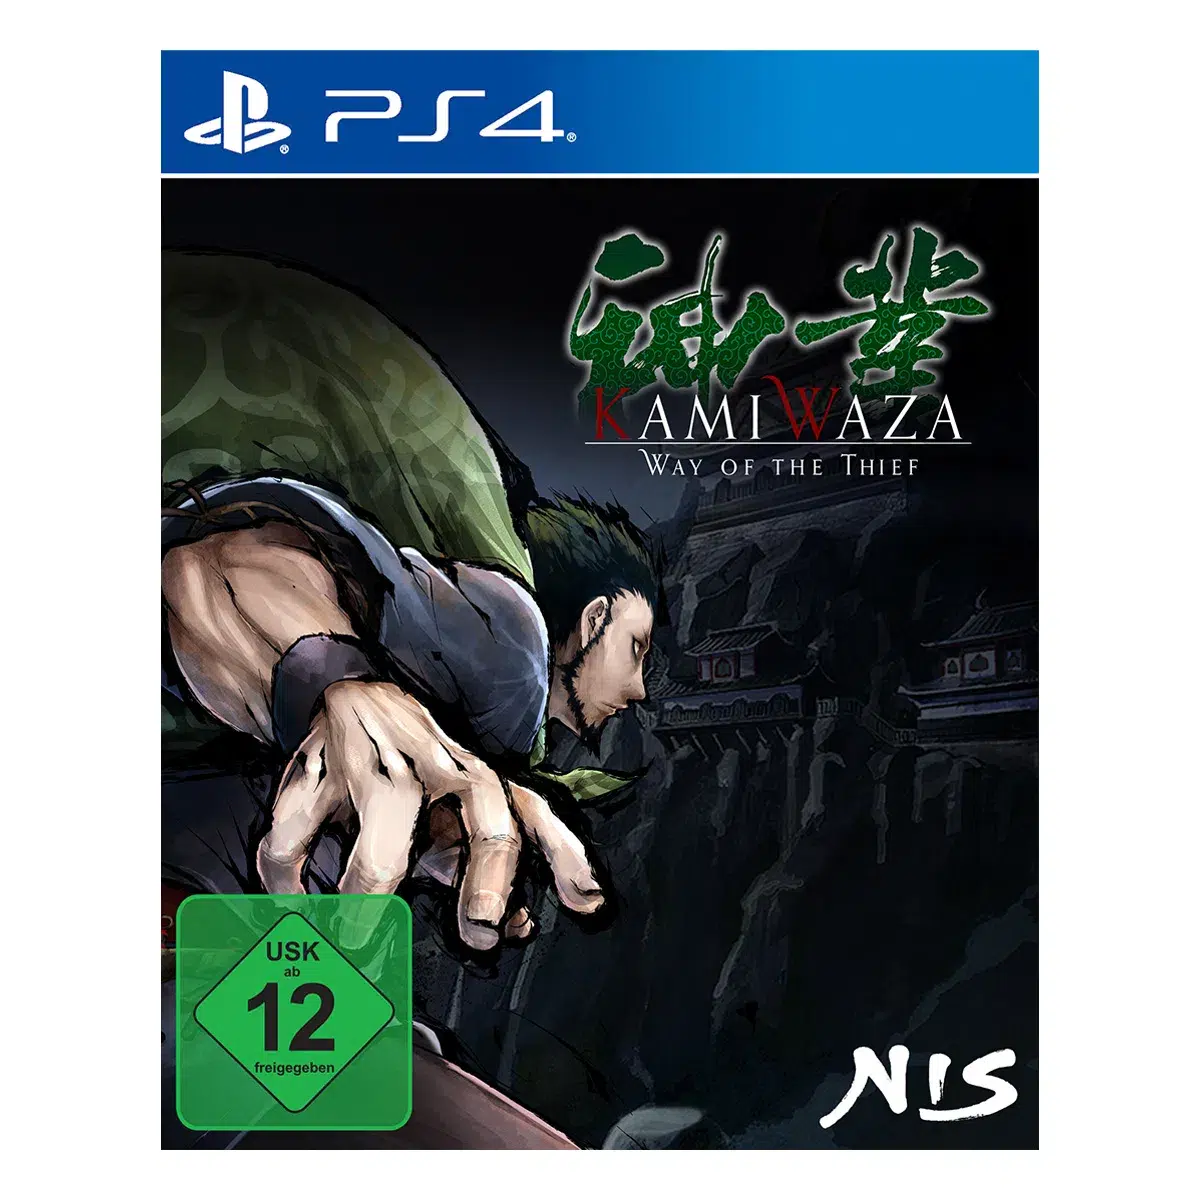 Kamiwaza: Way of the Thief (PS4) Cover